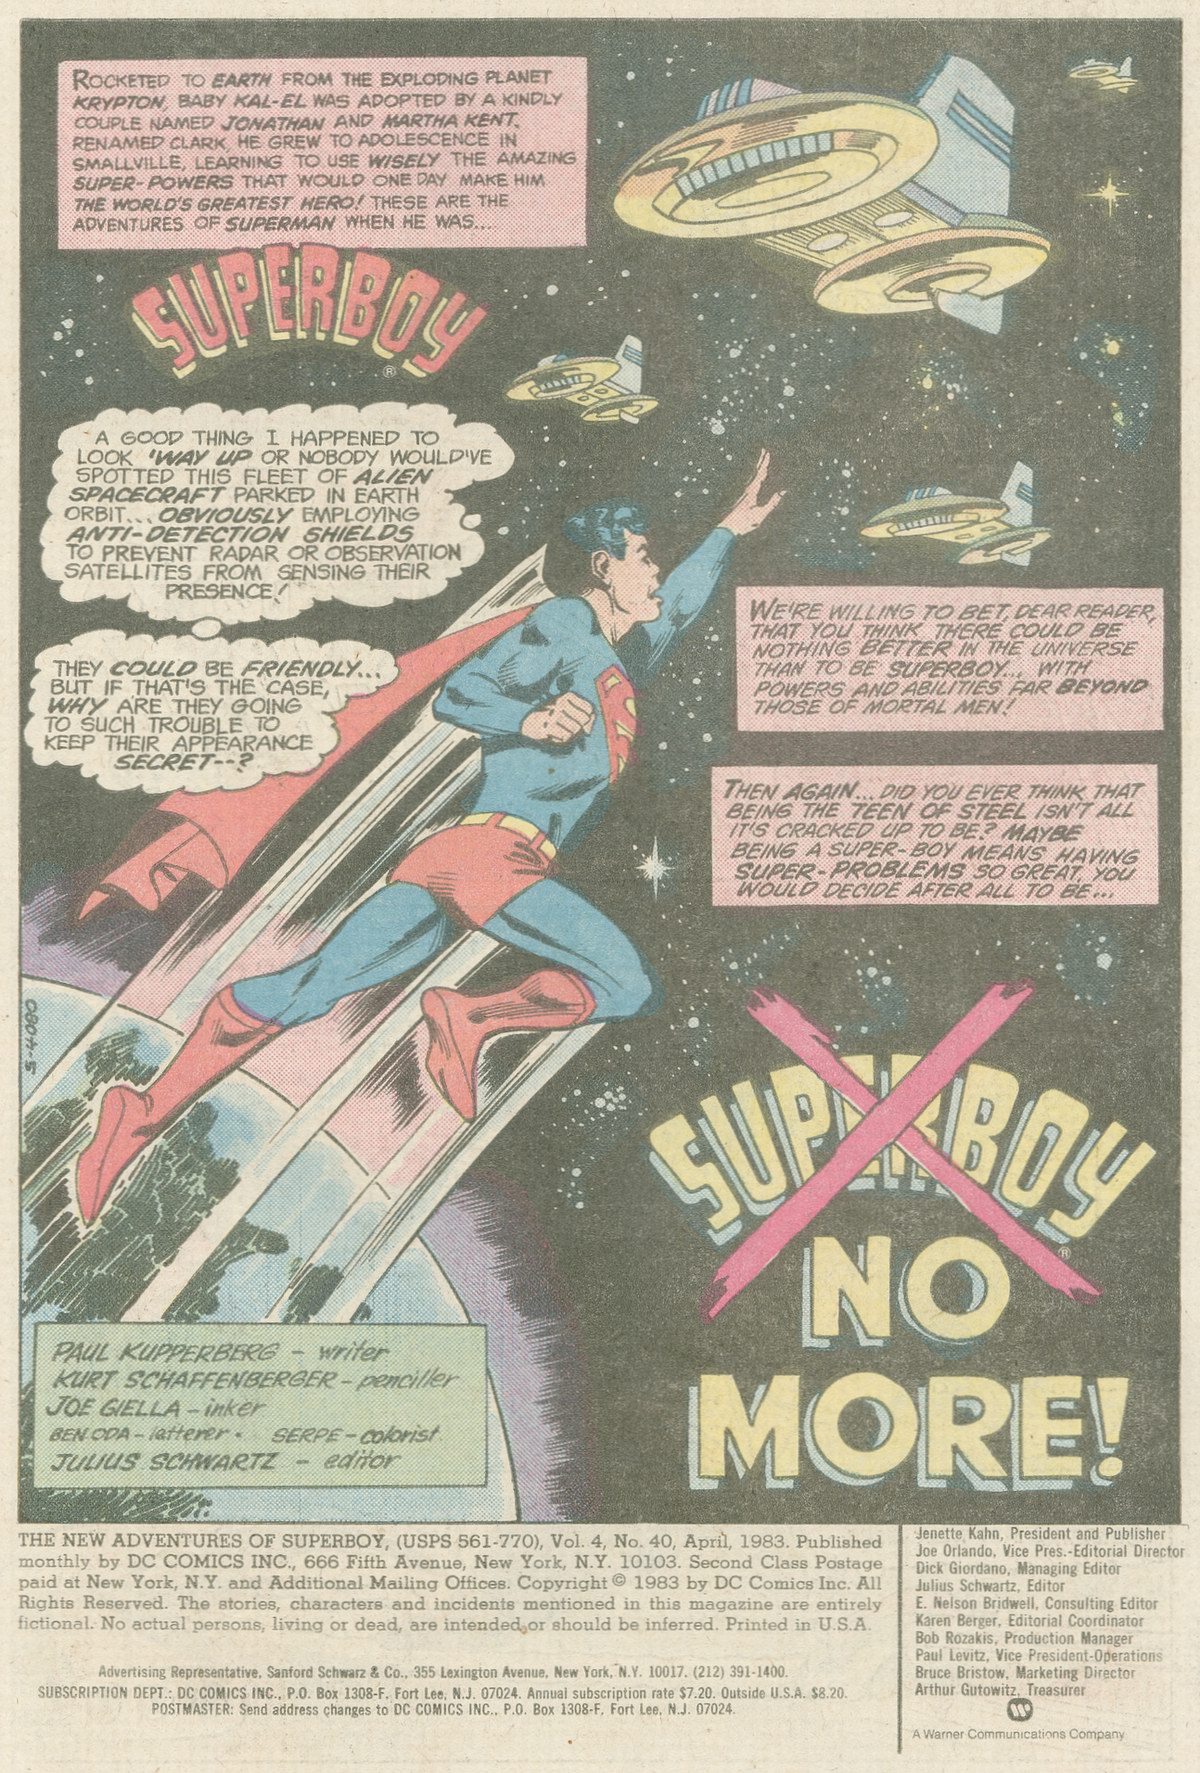 The New Adventures of Superboy 40 Page 1